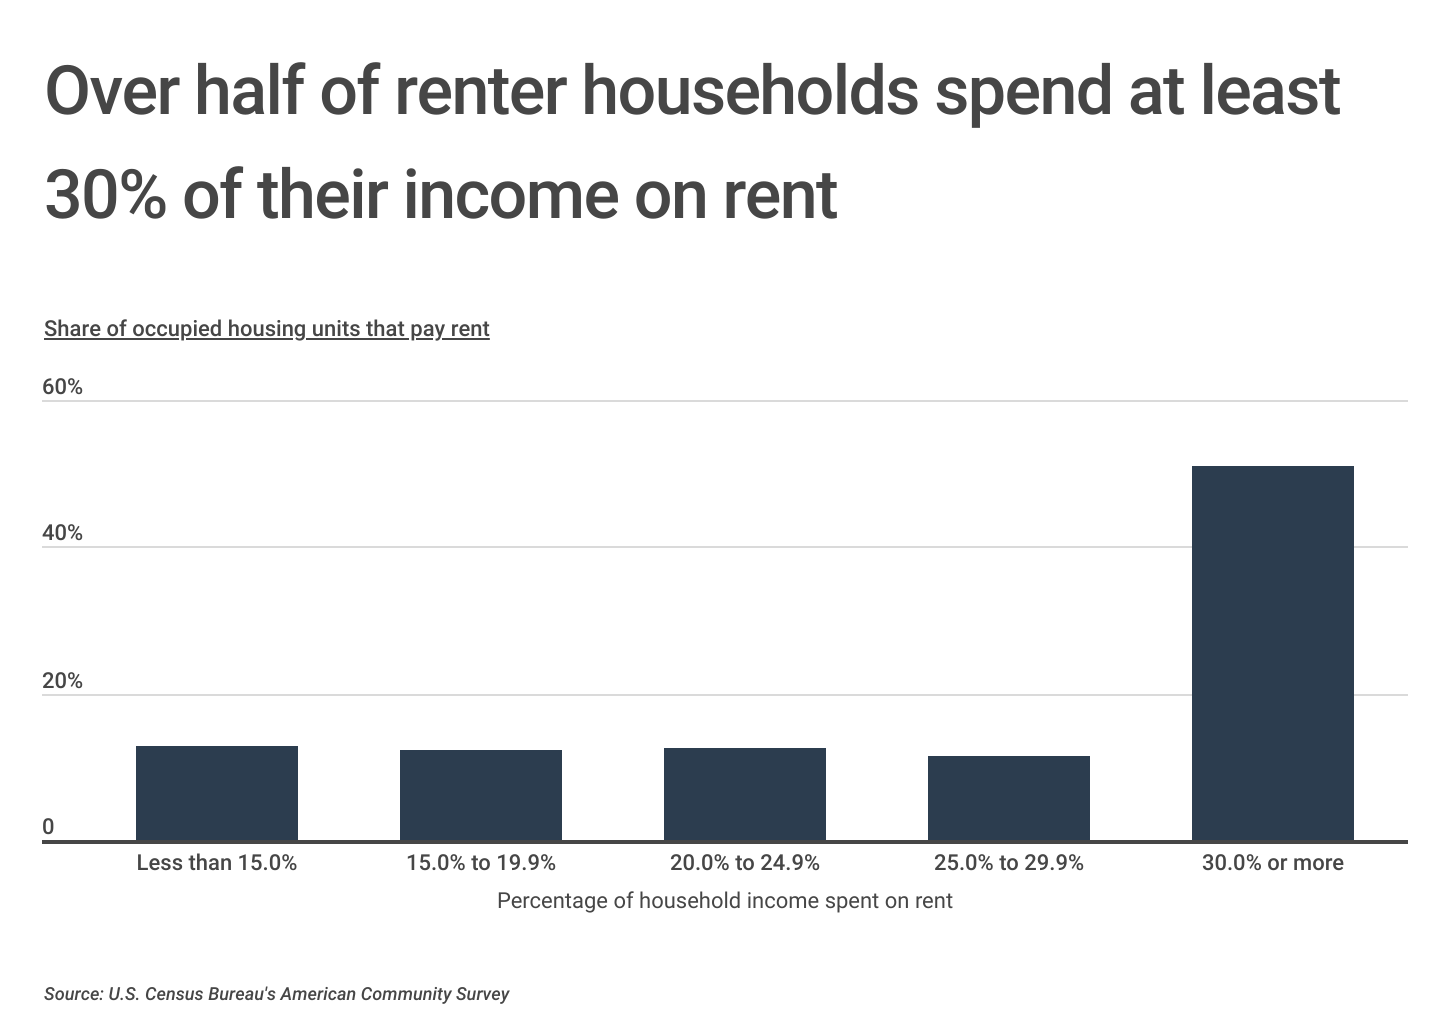 Chart2_Over half of renter households spend at least 30% of income on rent